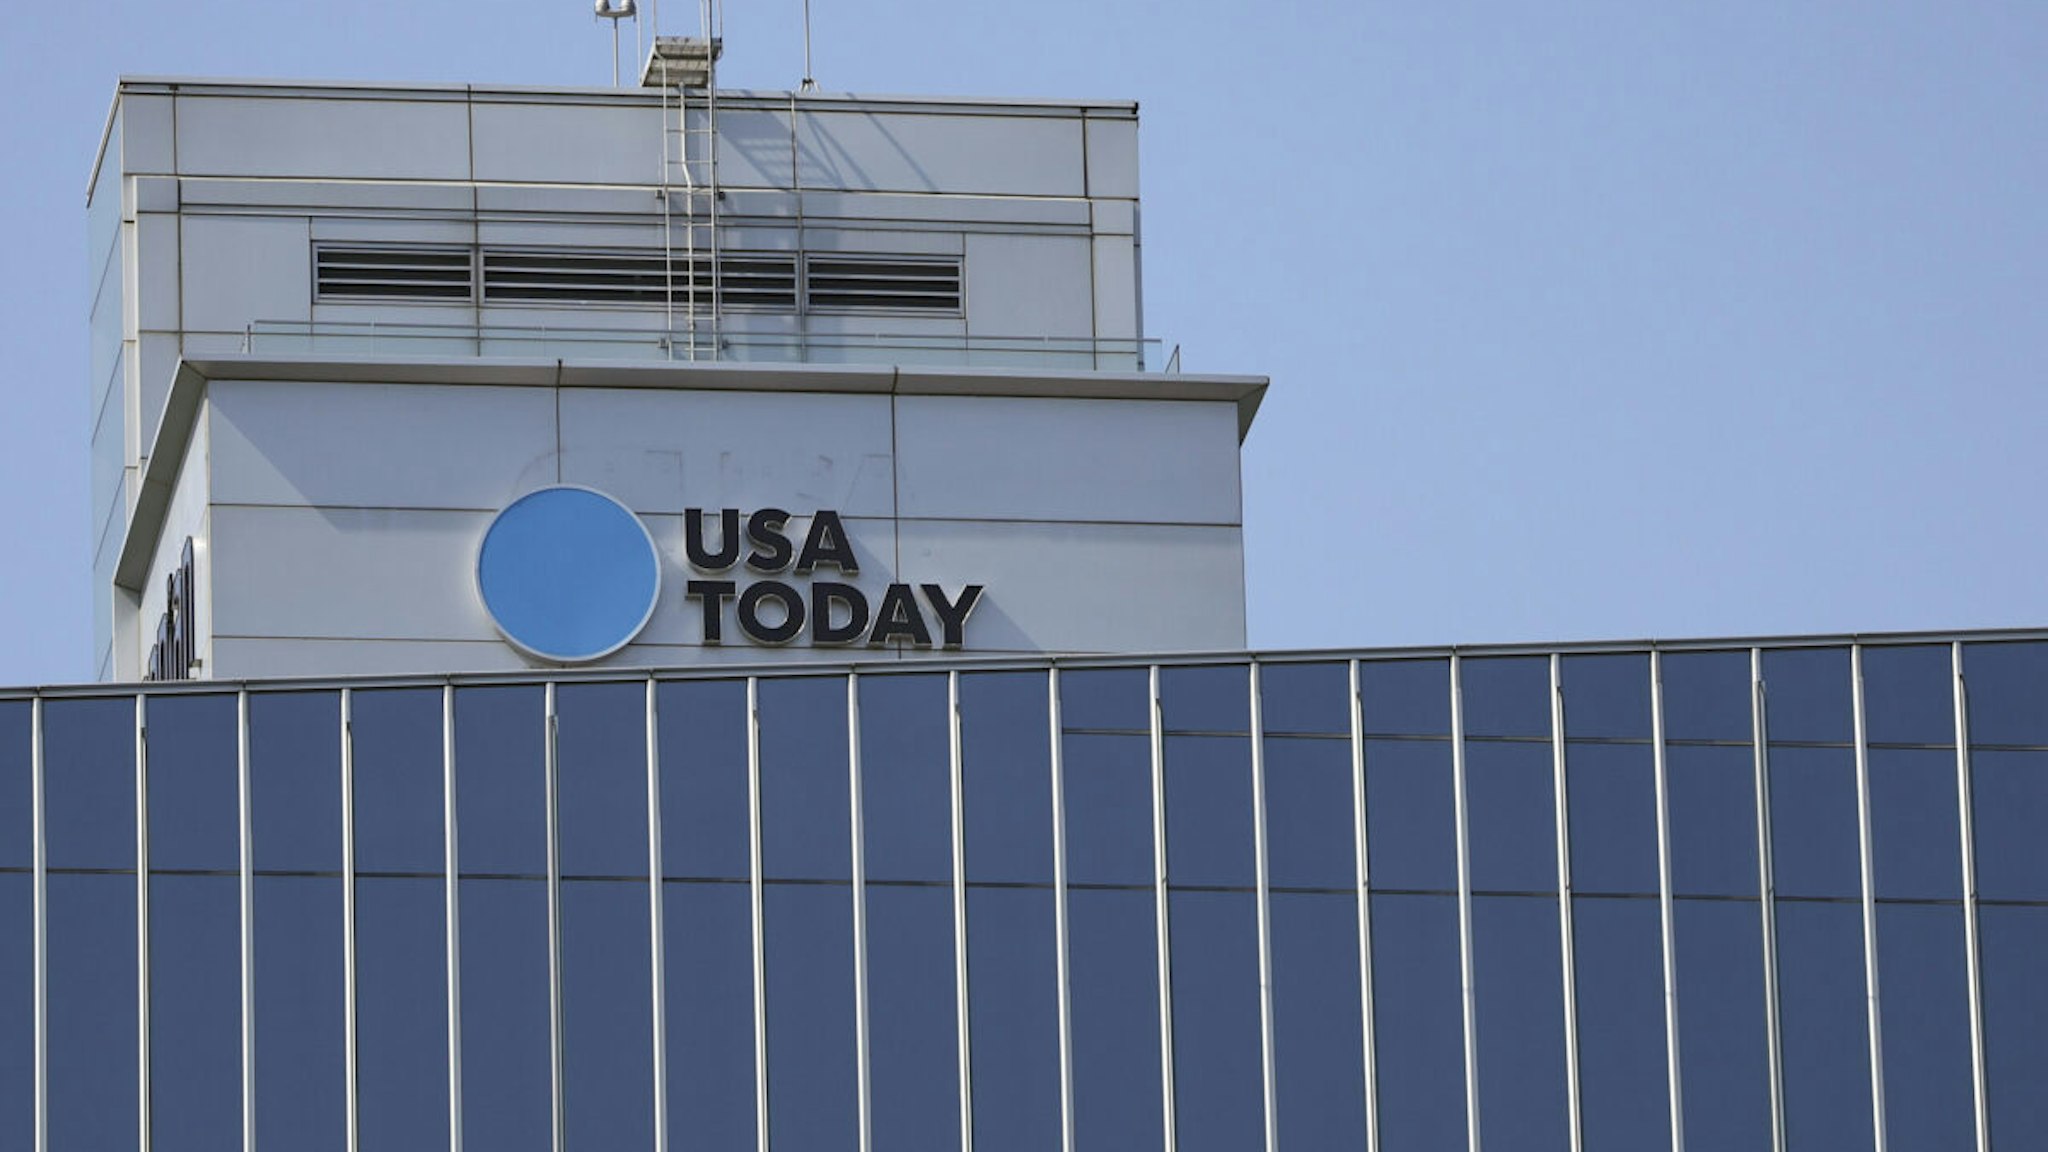 MCLEAN, VIRGINIA - JUNE 17: The headquarters of USA Today owned by Gannett Co. is seen June 17, 2022 in McLean, Virginia. USA Today said that following an investigation 23 articles had been removed from its website after it was discovered that a reporter may have fabricated sources and quotes for the articles.